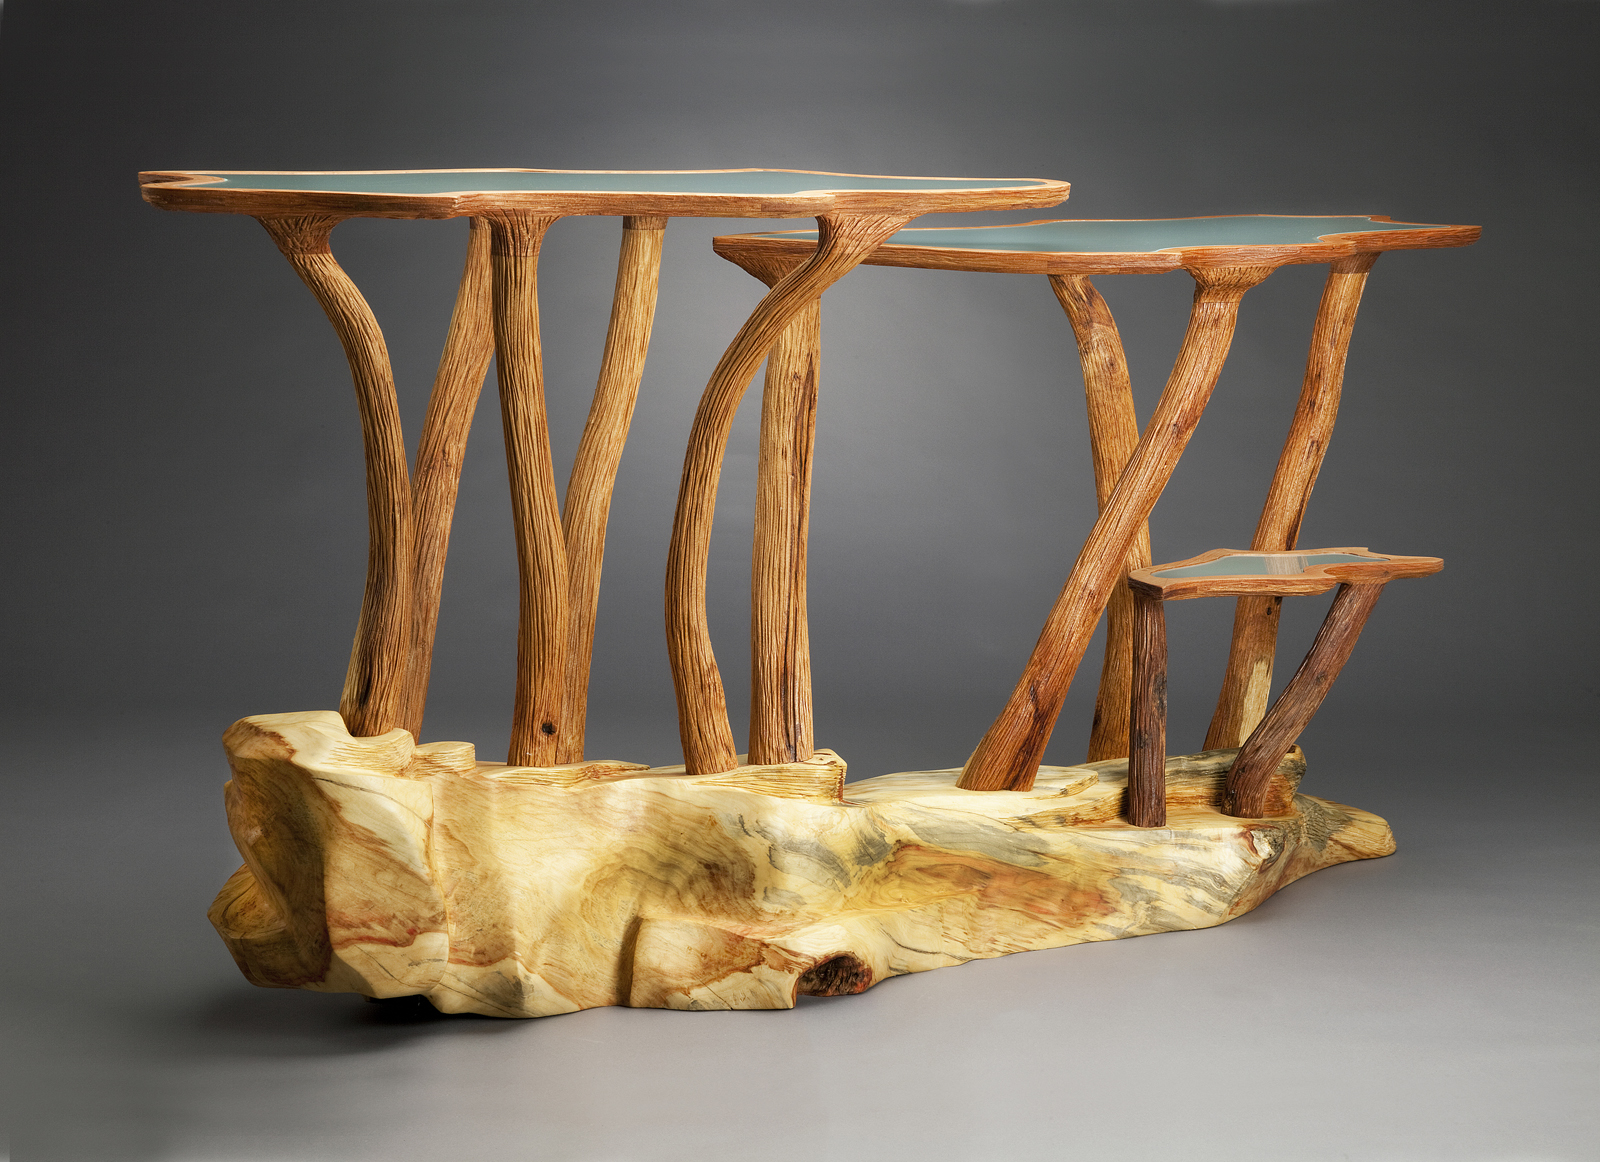 Squash Blossom Table 1 by Aaron Laux